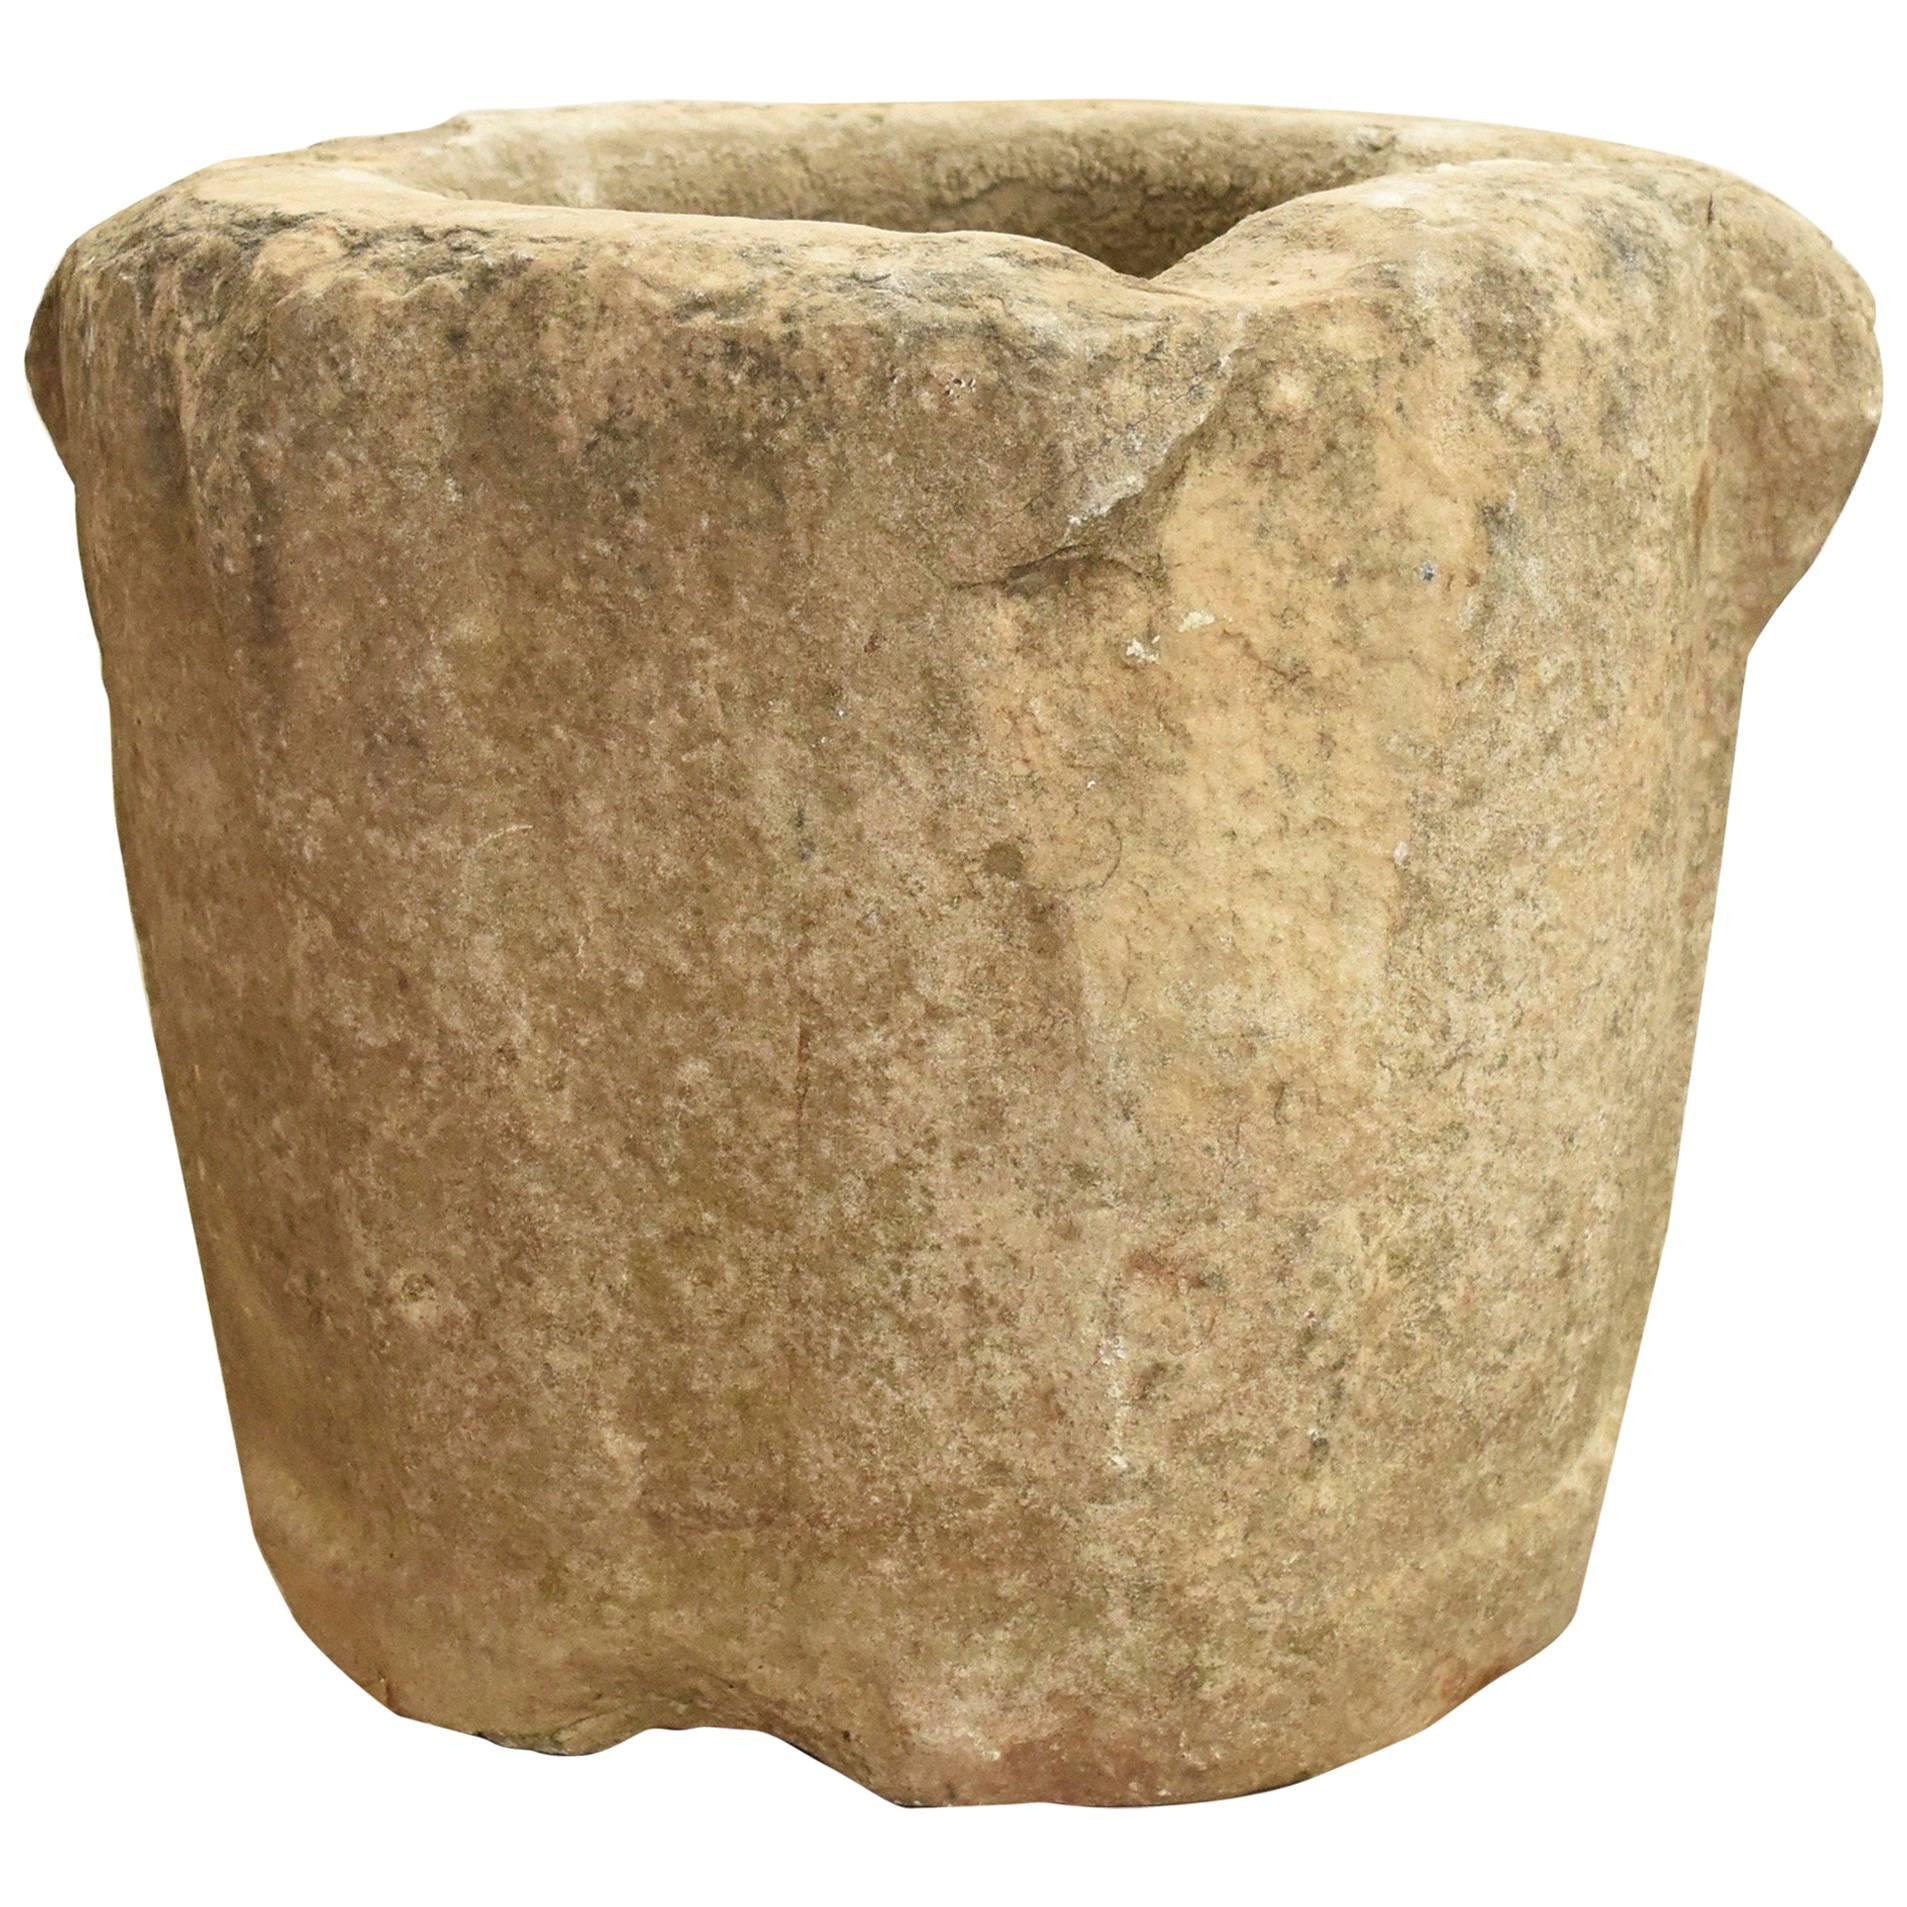 Ancient French Stone Mortar from 17th Century or Earlier